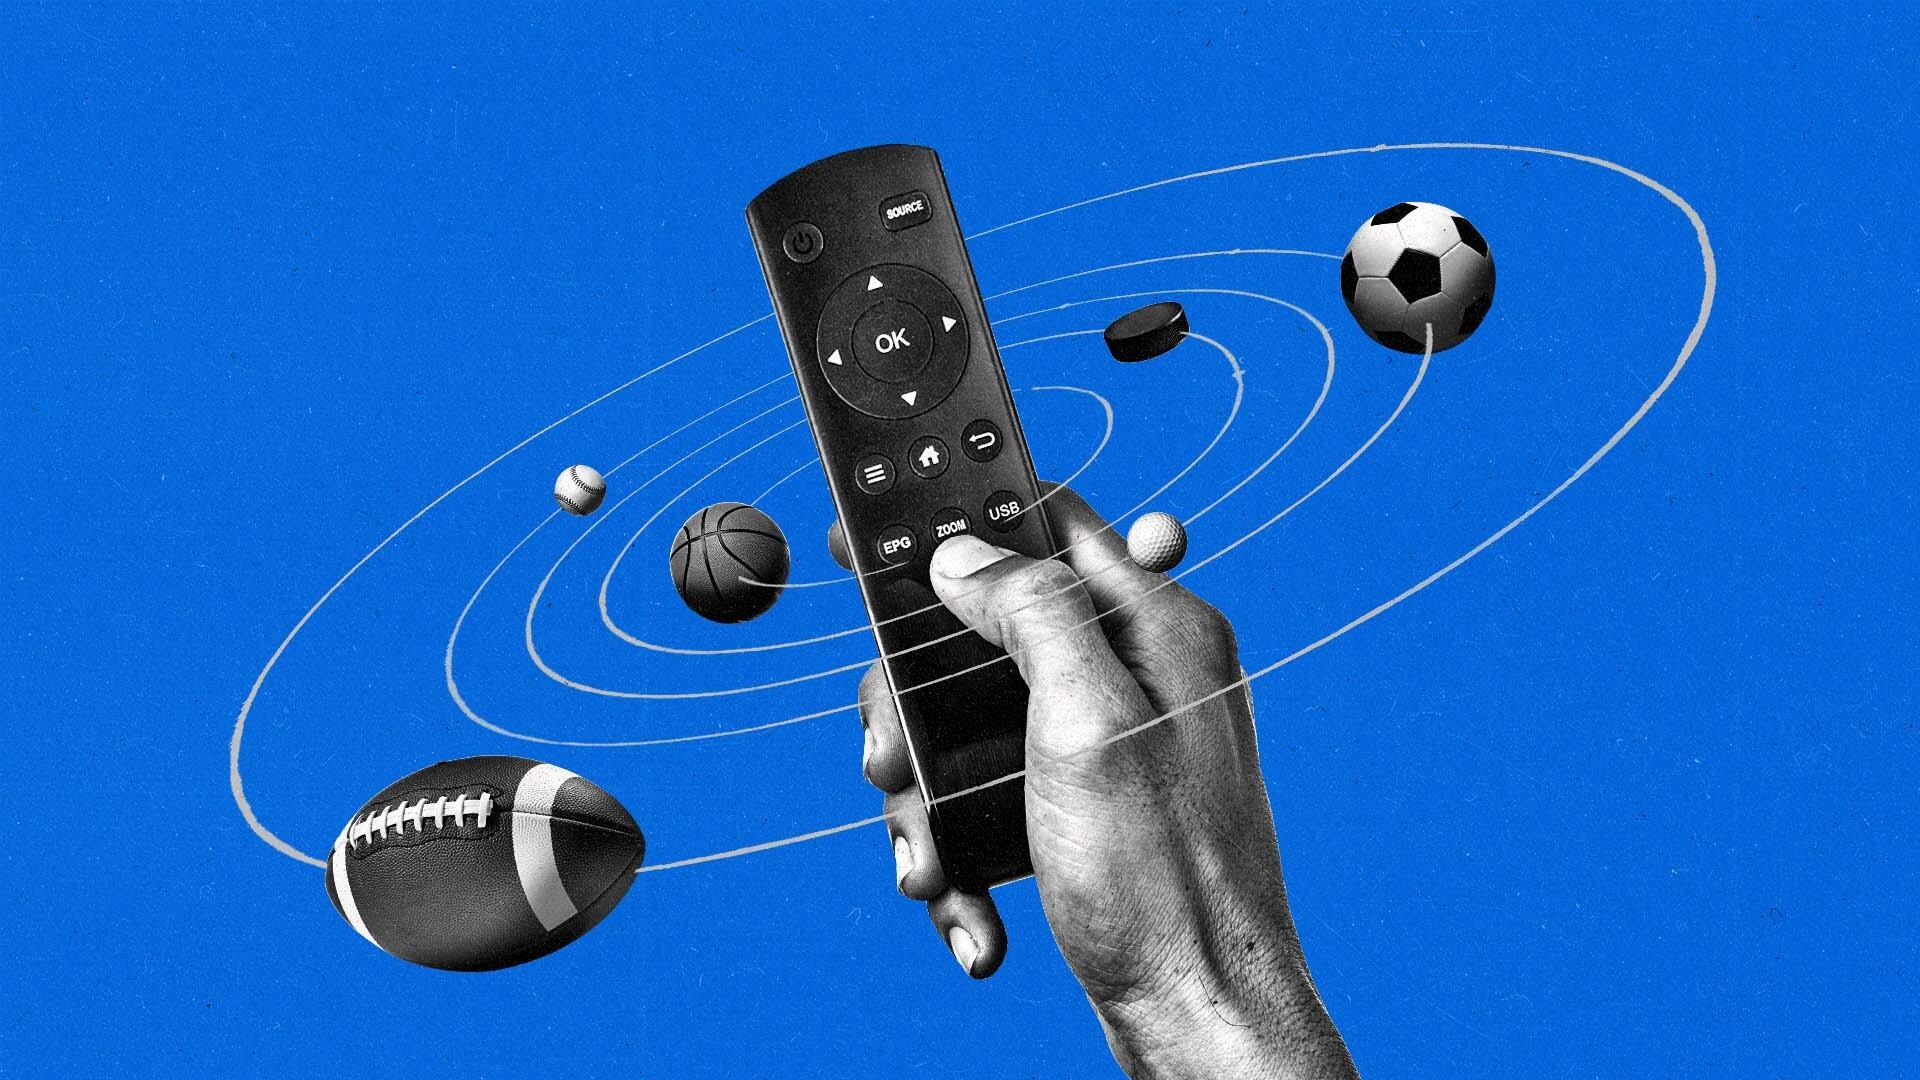 A solar system of balls from various sports orbits around a hand holding a TV remote control.